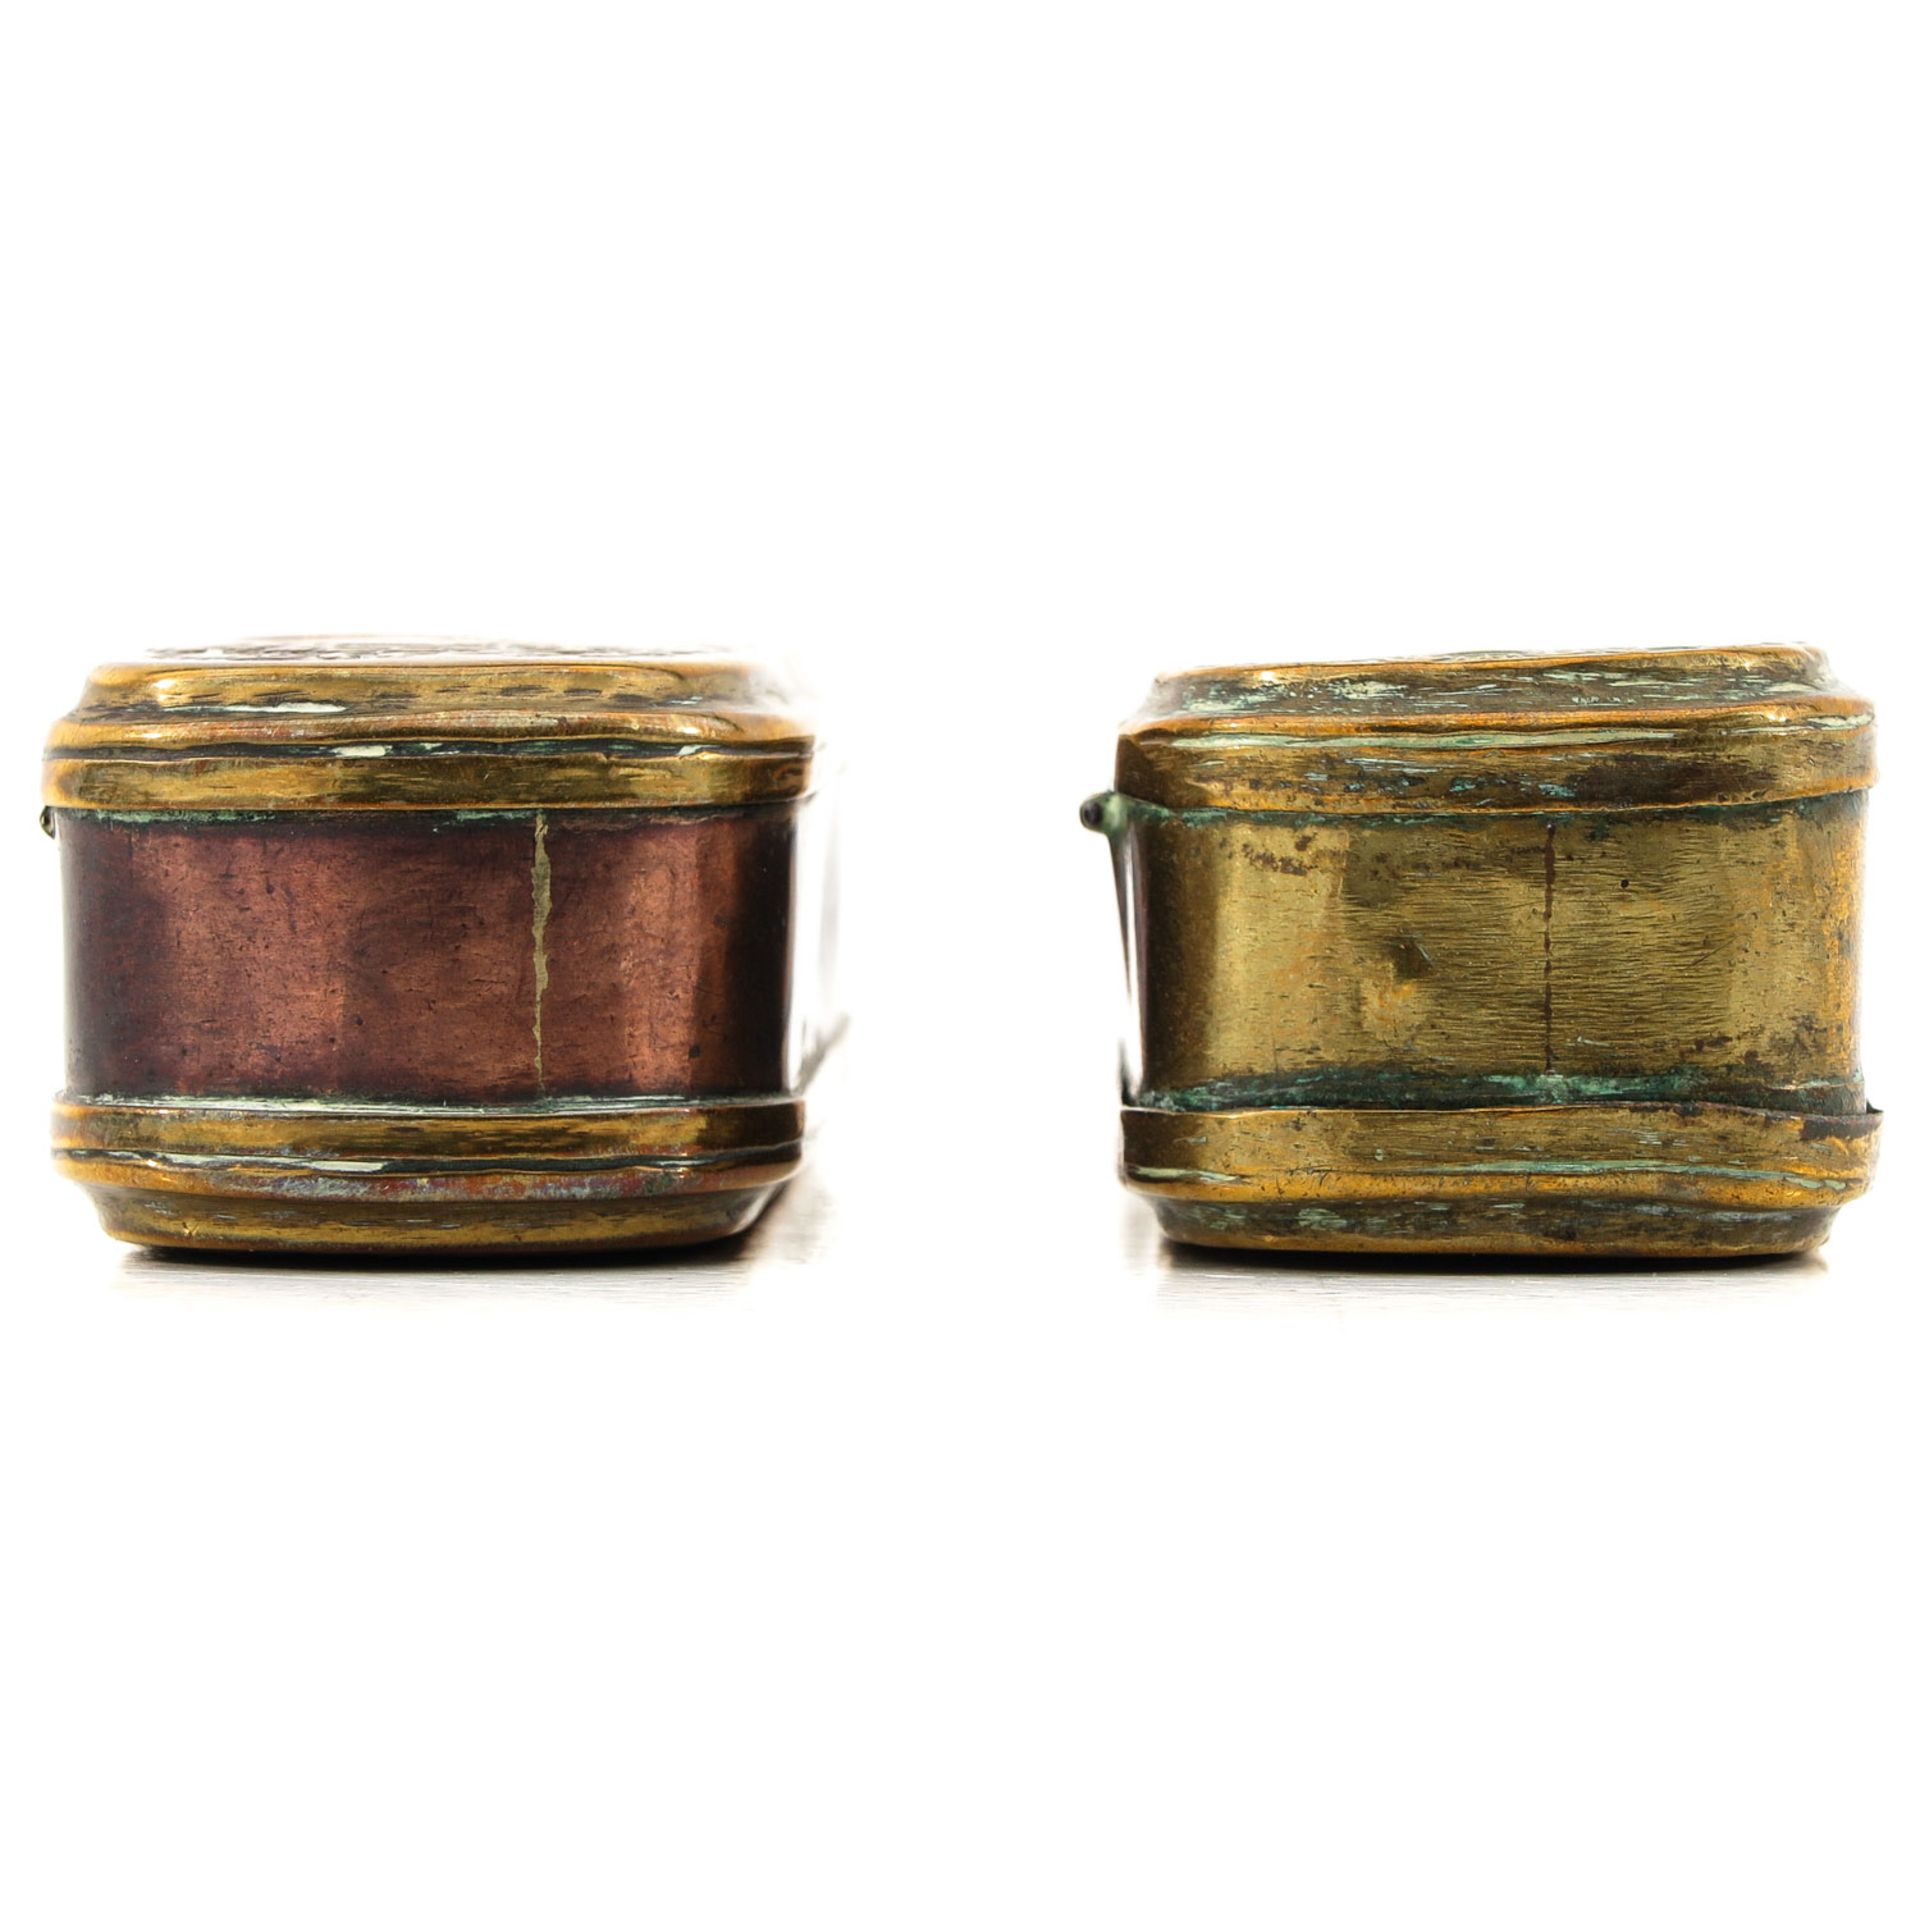 A Collection of 2 18th Century Copper Tobacco Boxes - Image 4 of 9